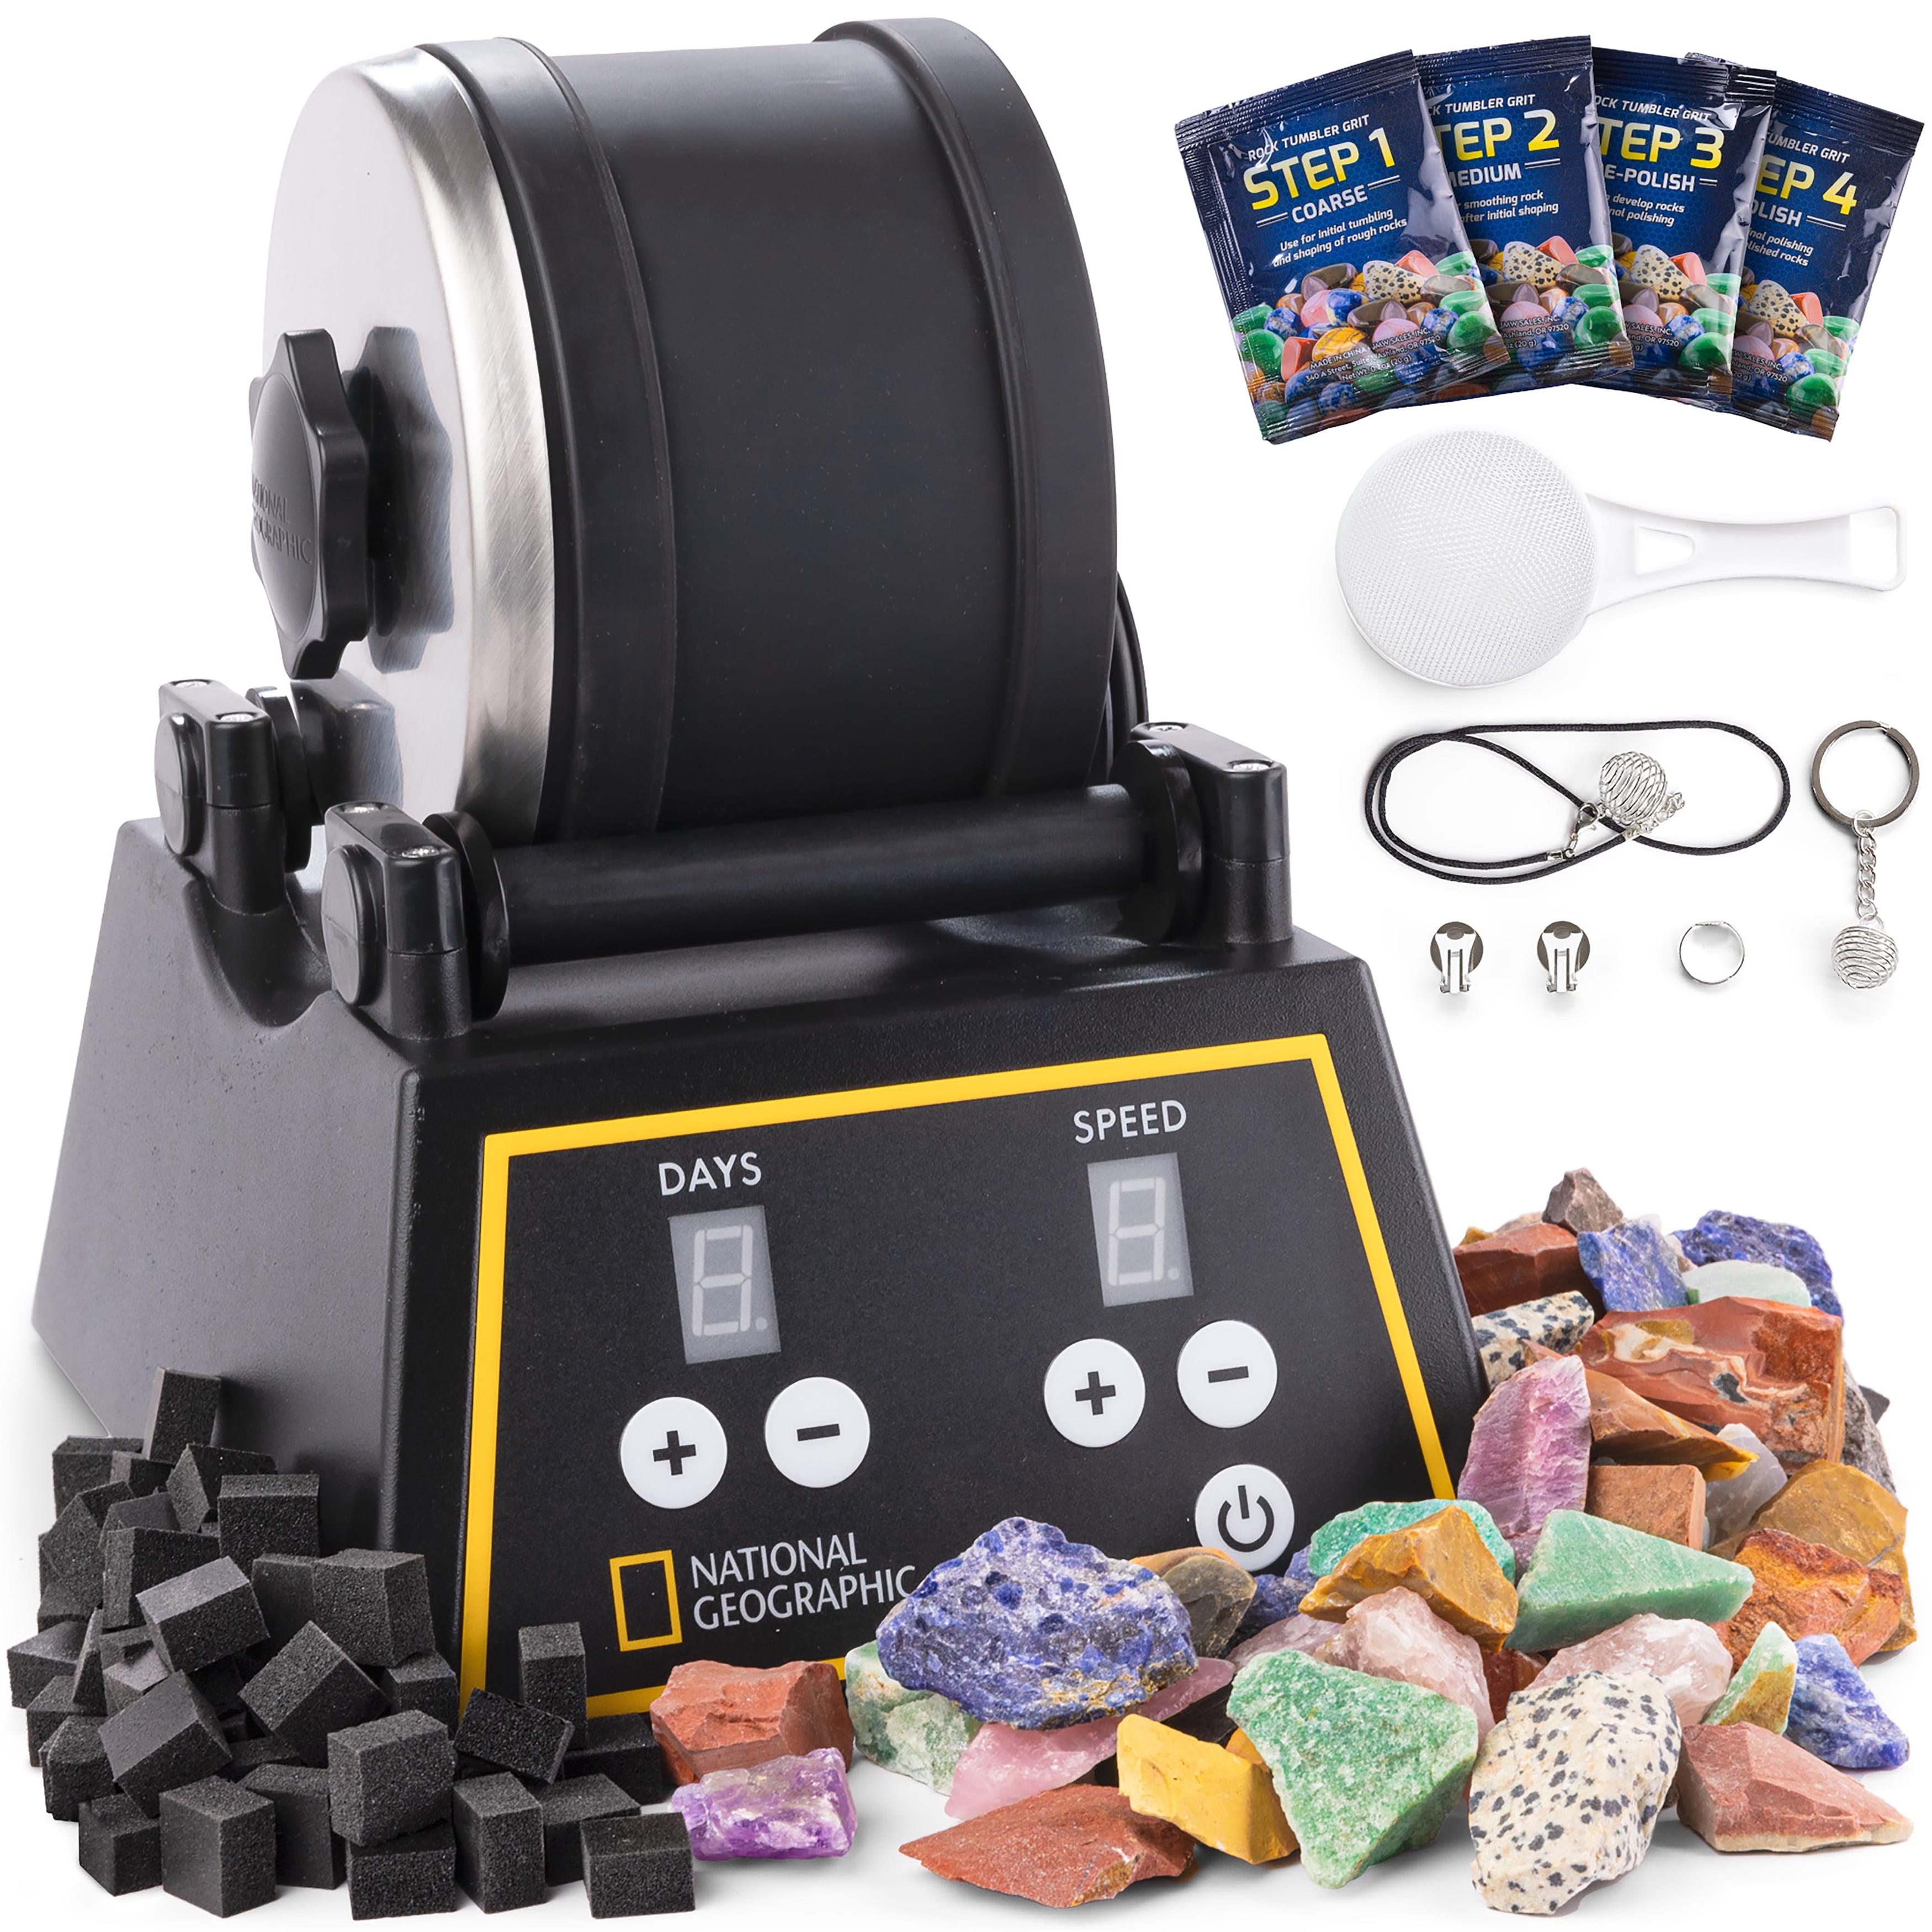 National Geographic Professional Rock Tumbler Kit- Rock Polisher for Kids & Adults, Complete Rock Tumbler Kit with Durable Tumbler, Rocks, Grit